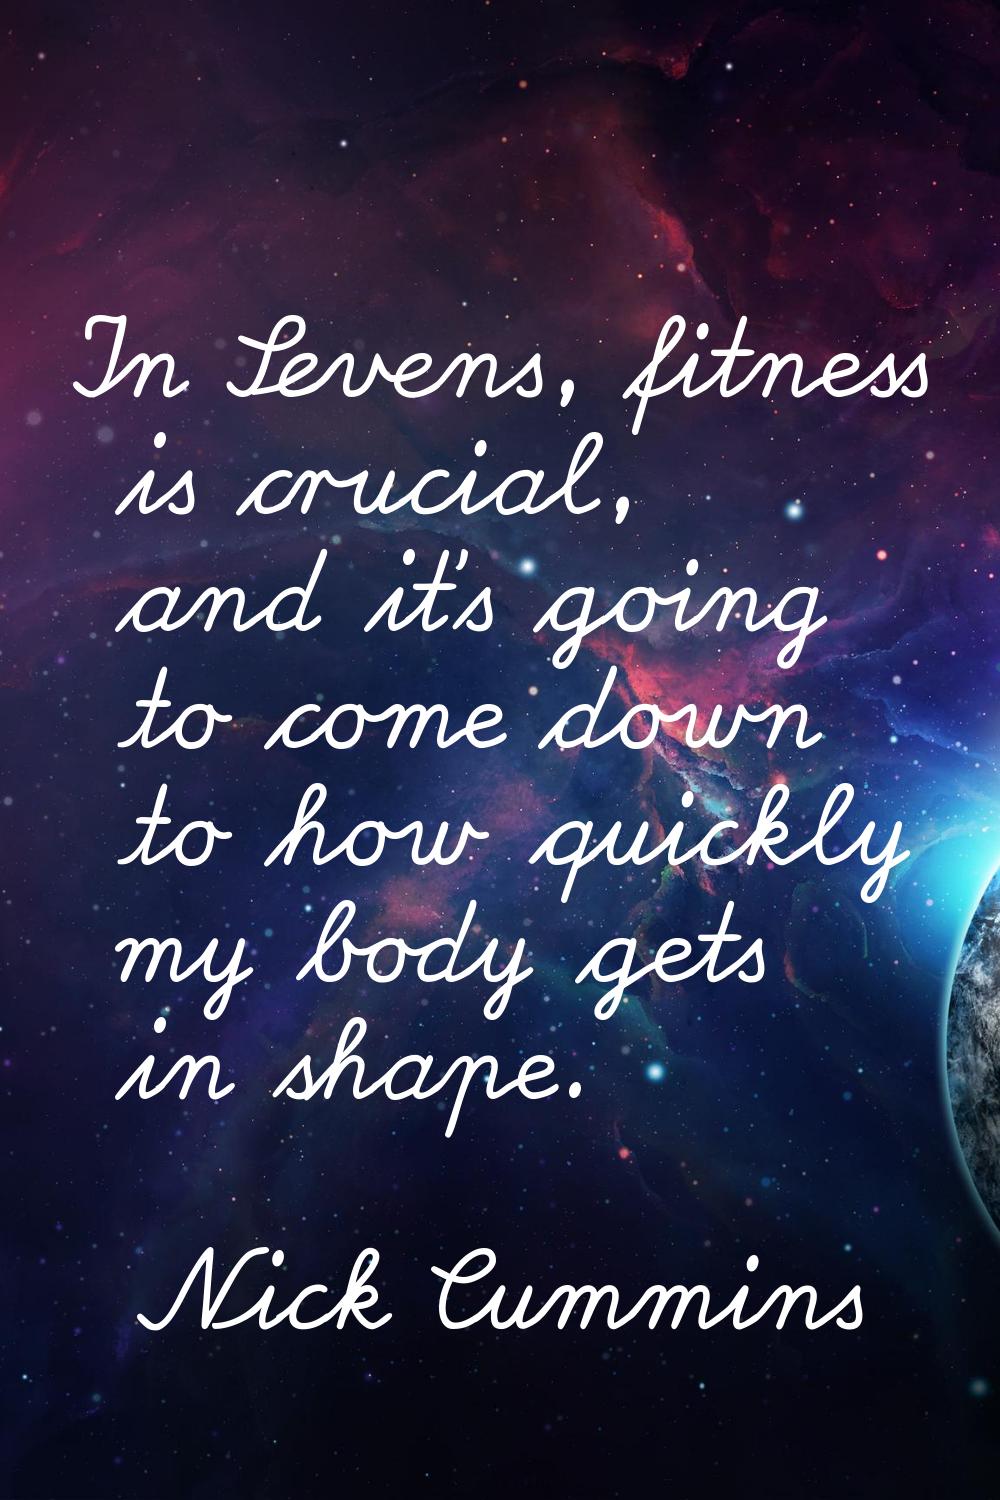 In Sevens, fitness is crucial, and it's going to come down to how quickly my body gets in shape.